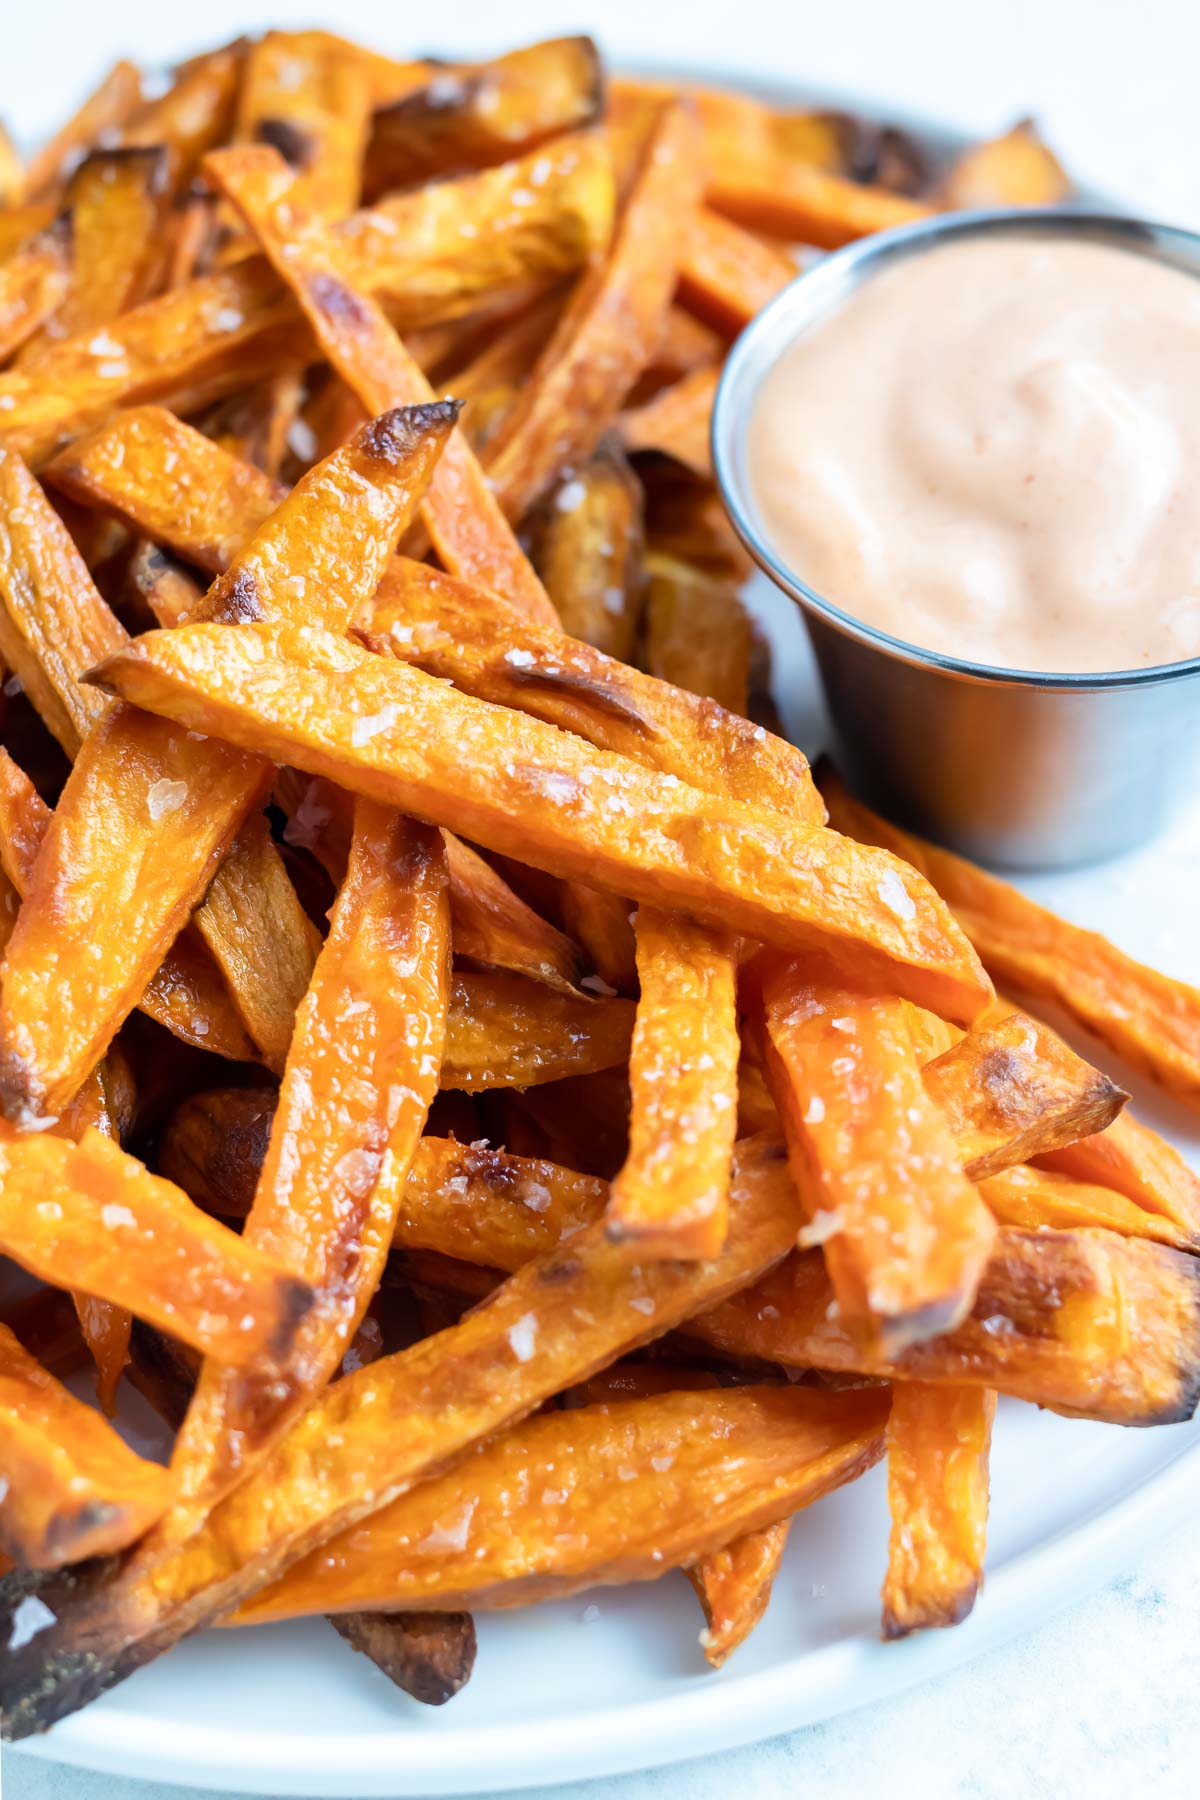 Healthy and homemade sweet potato fries served with sauce.